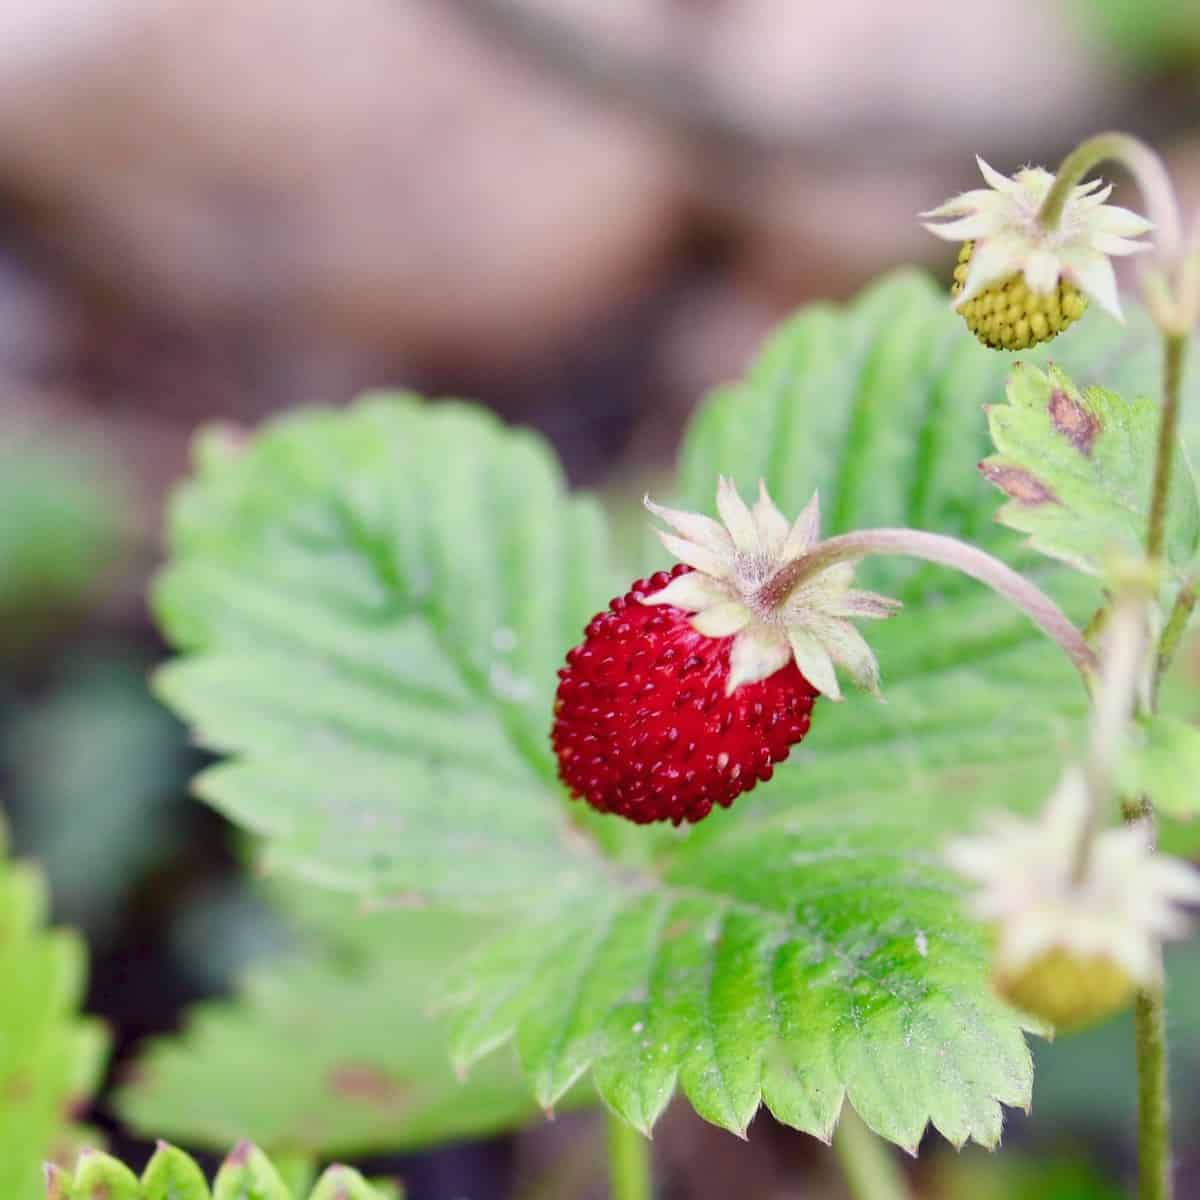 French strawberry plant in the garden.